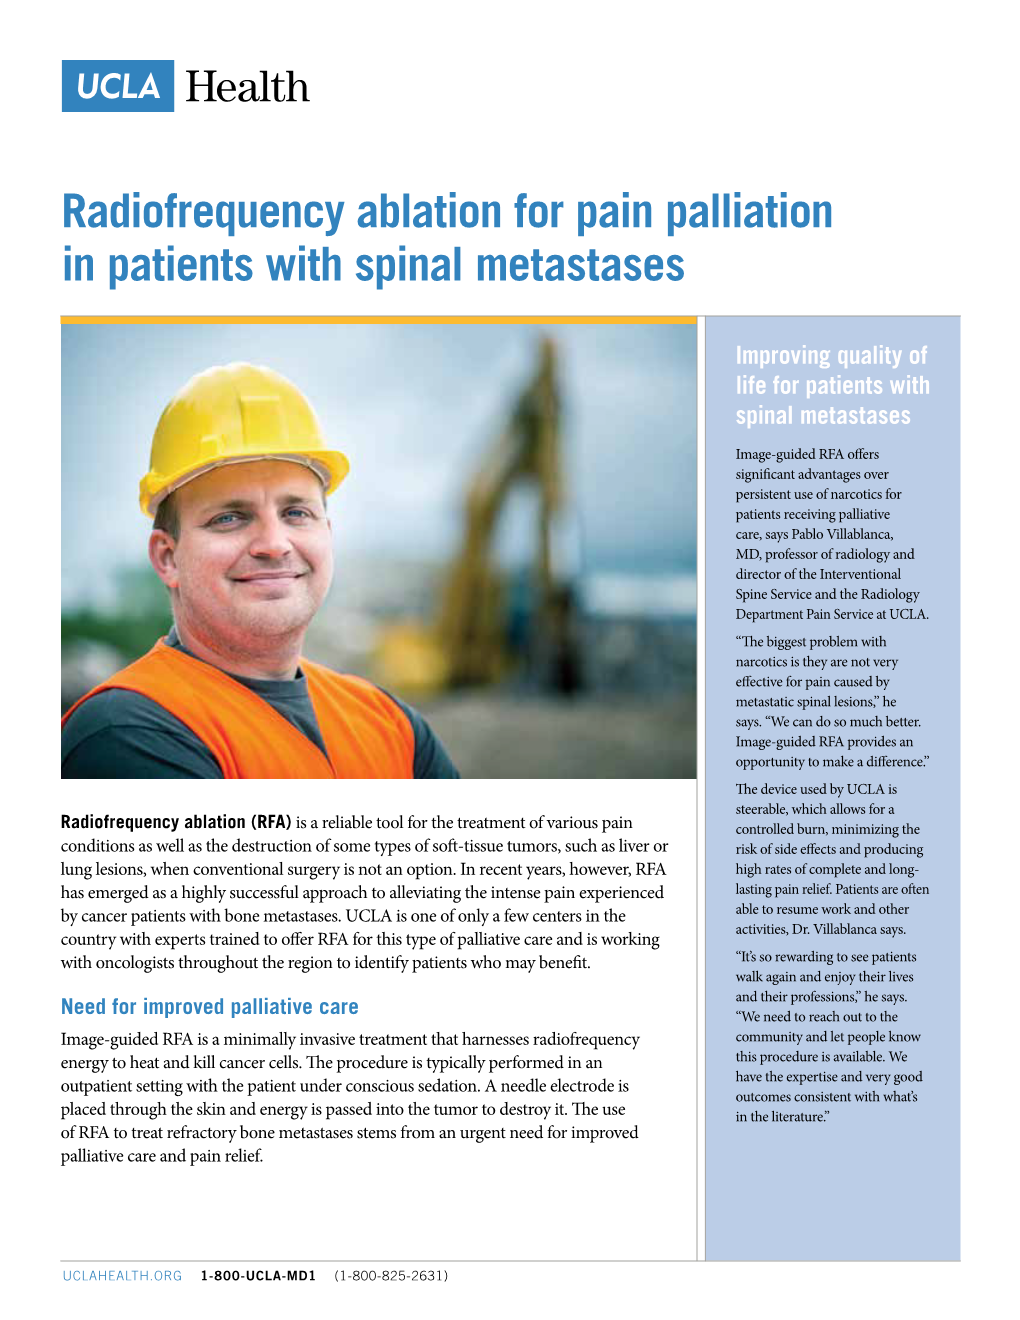 Radiofrequency Ablation for Pain Palliation in Patients with Spinal Metastases